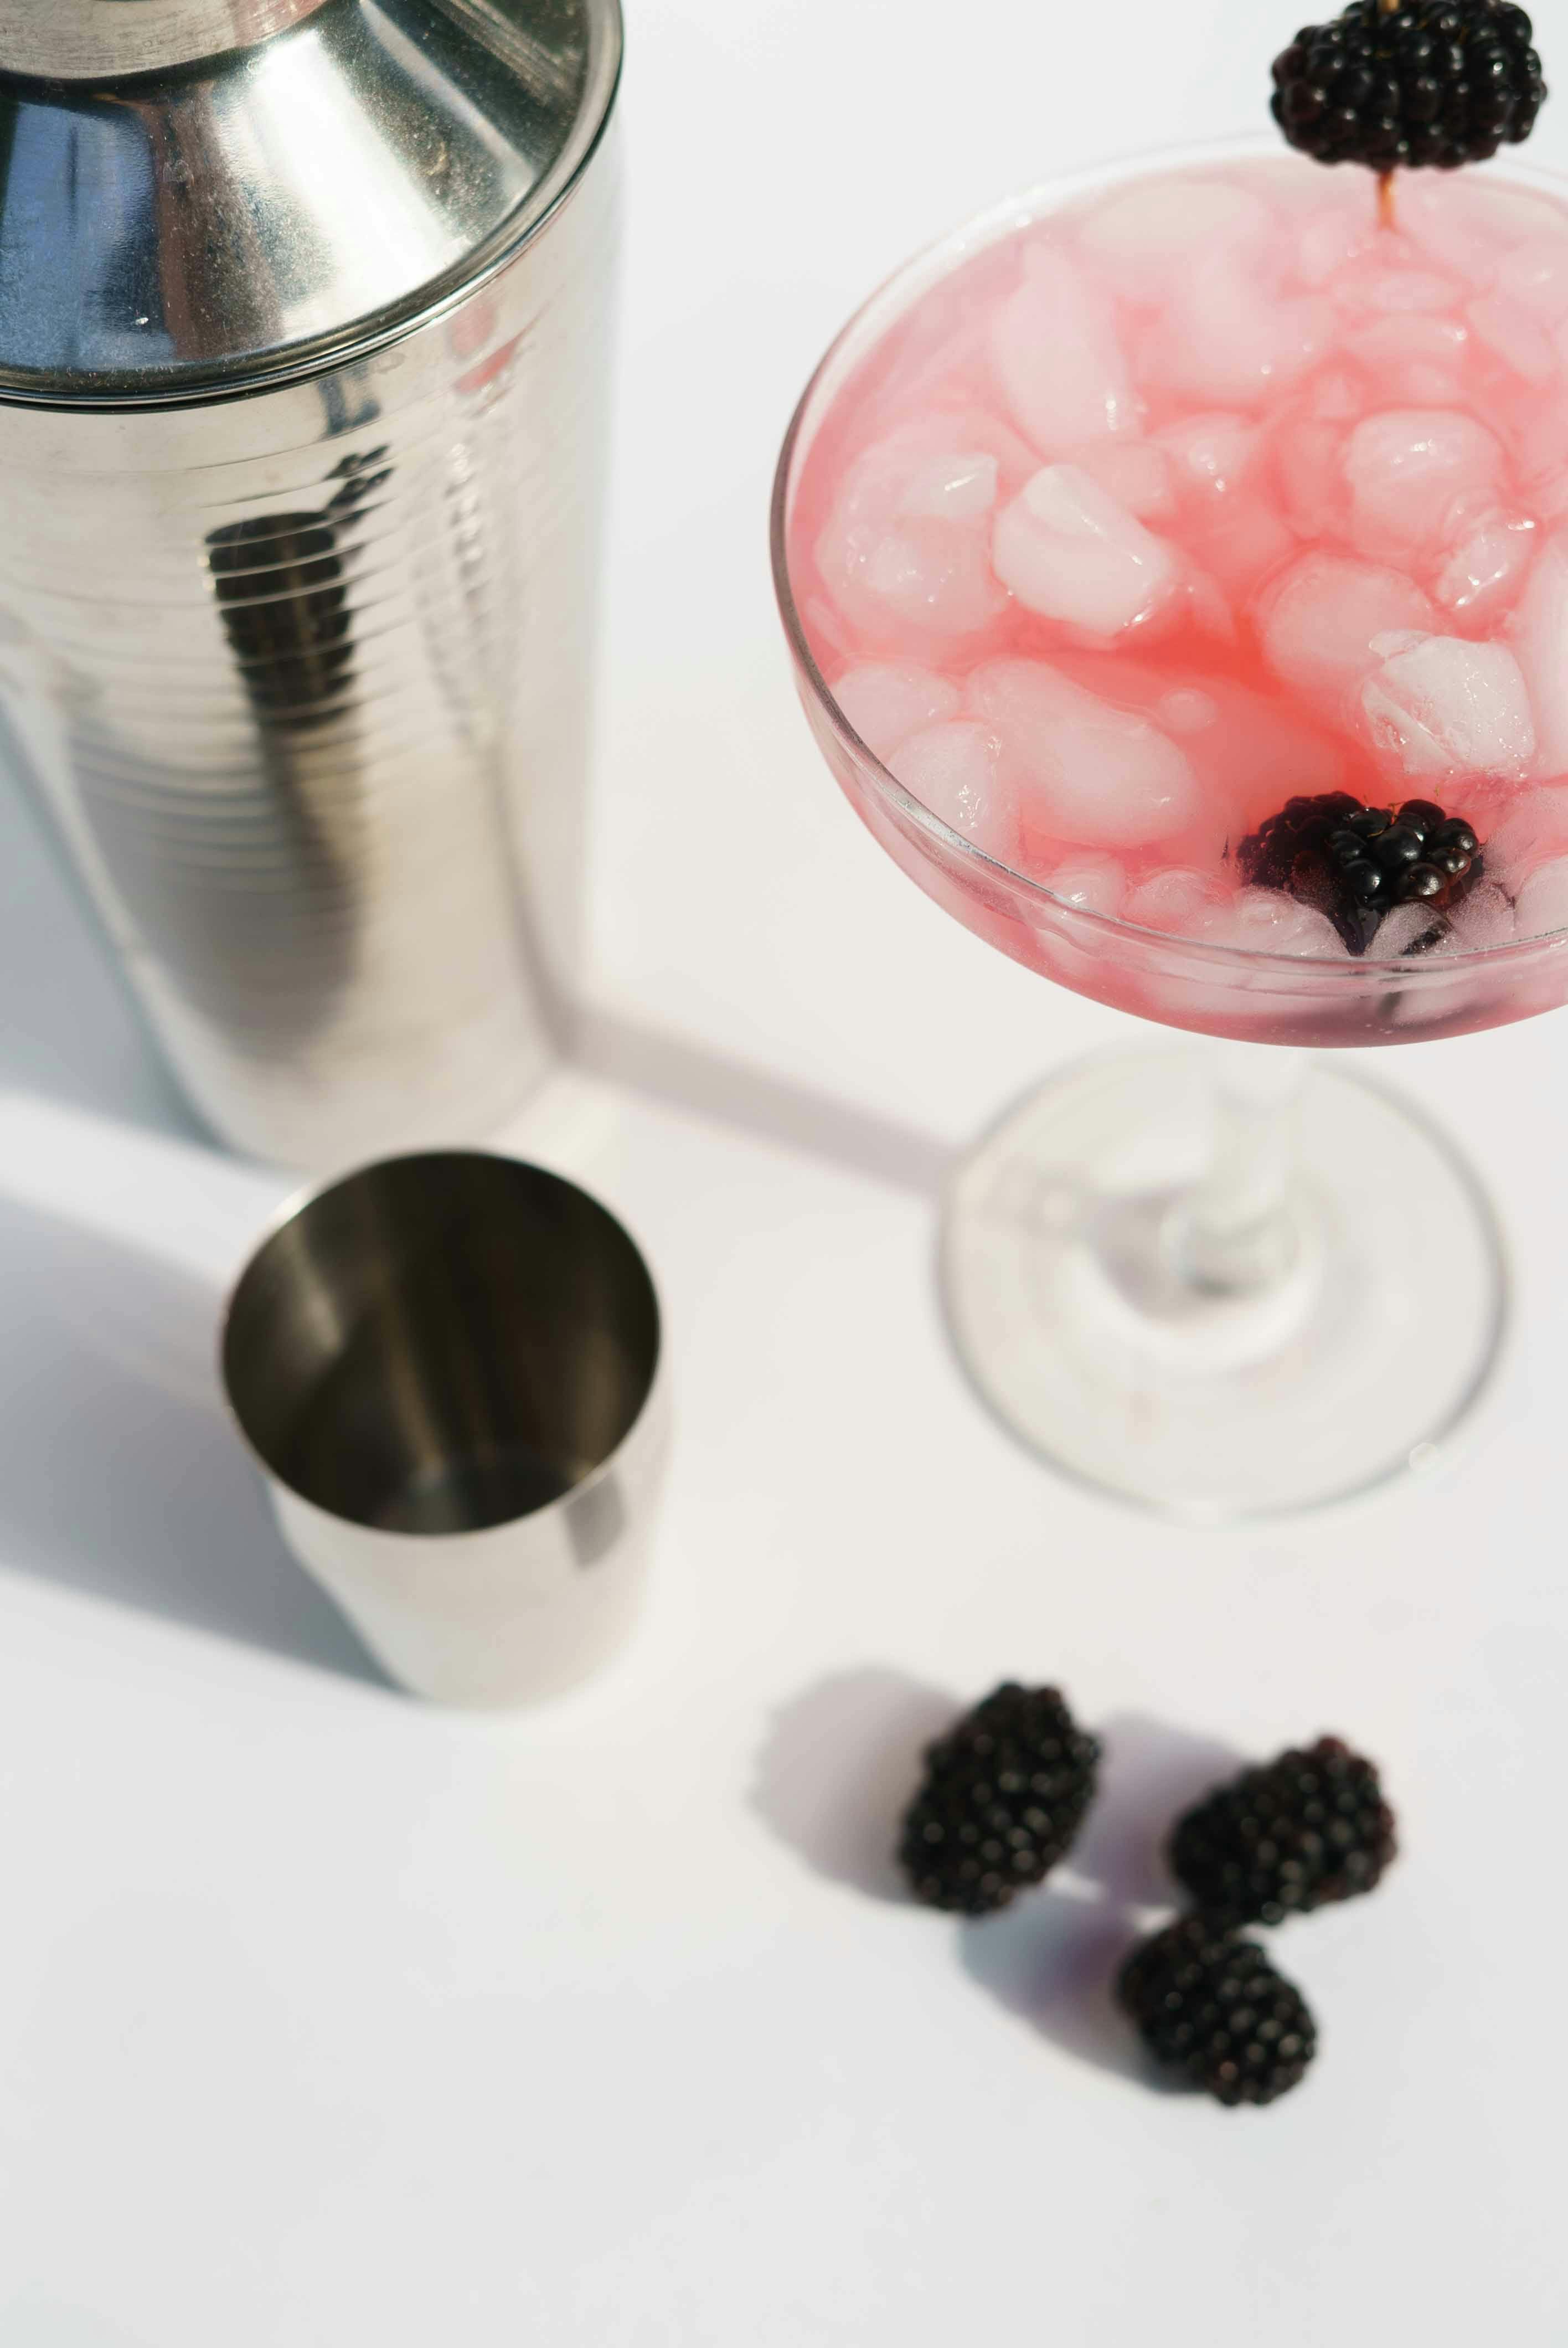 shaker and glass of margarita cocktail with blueberries